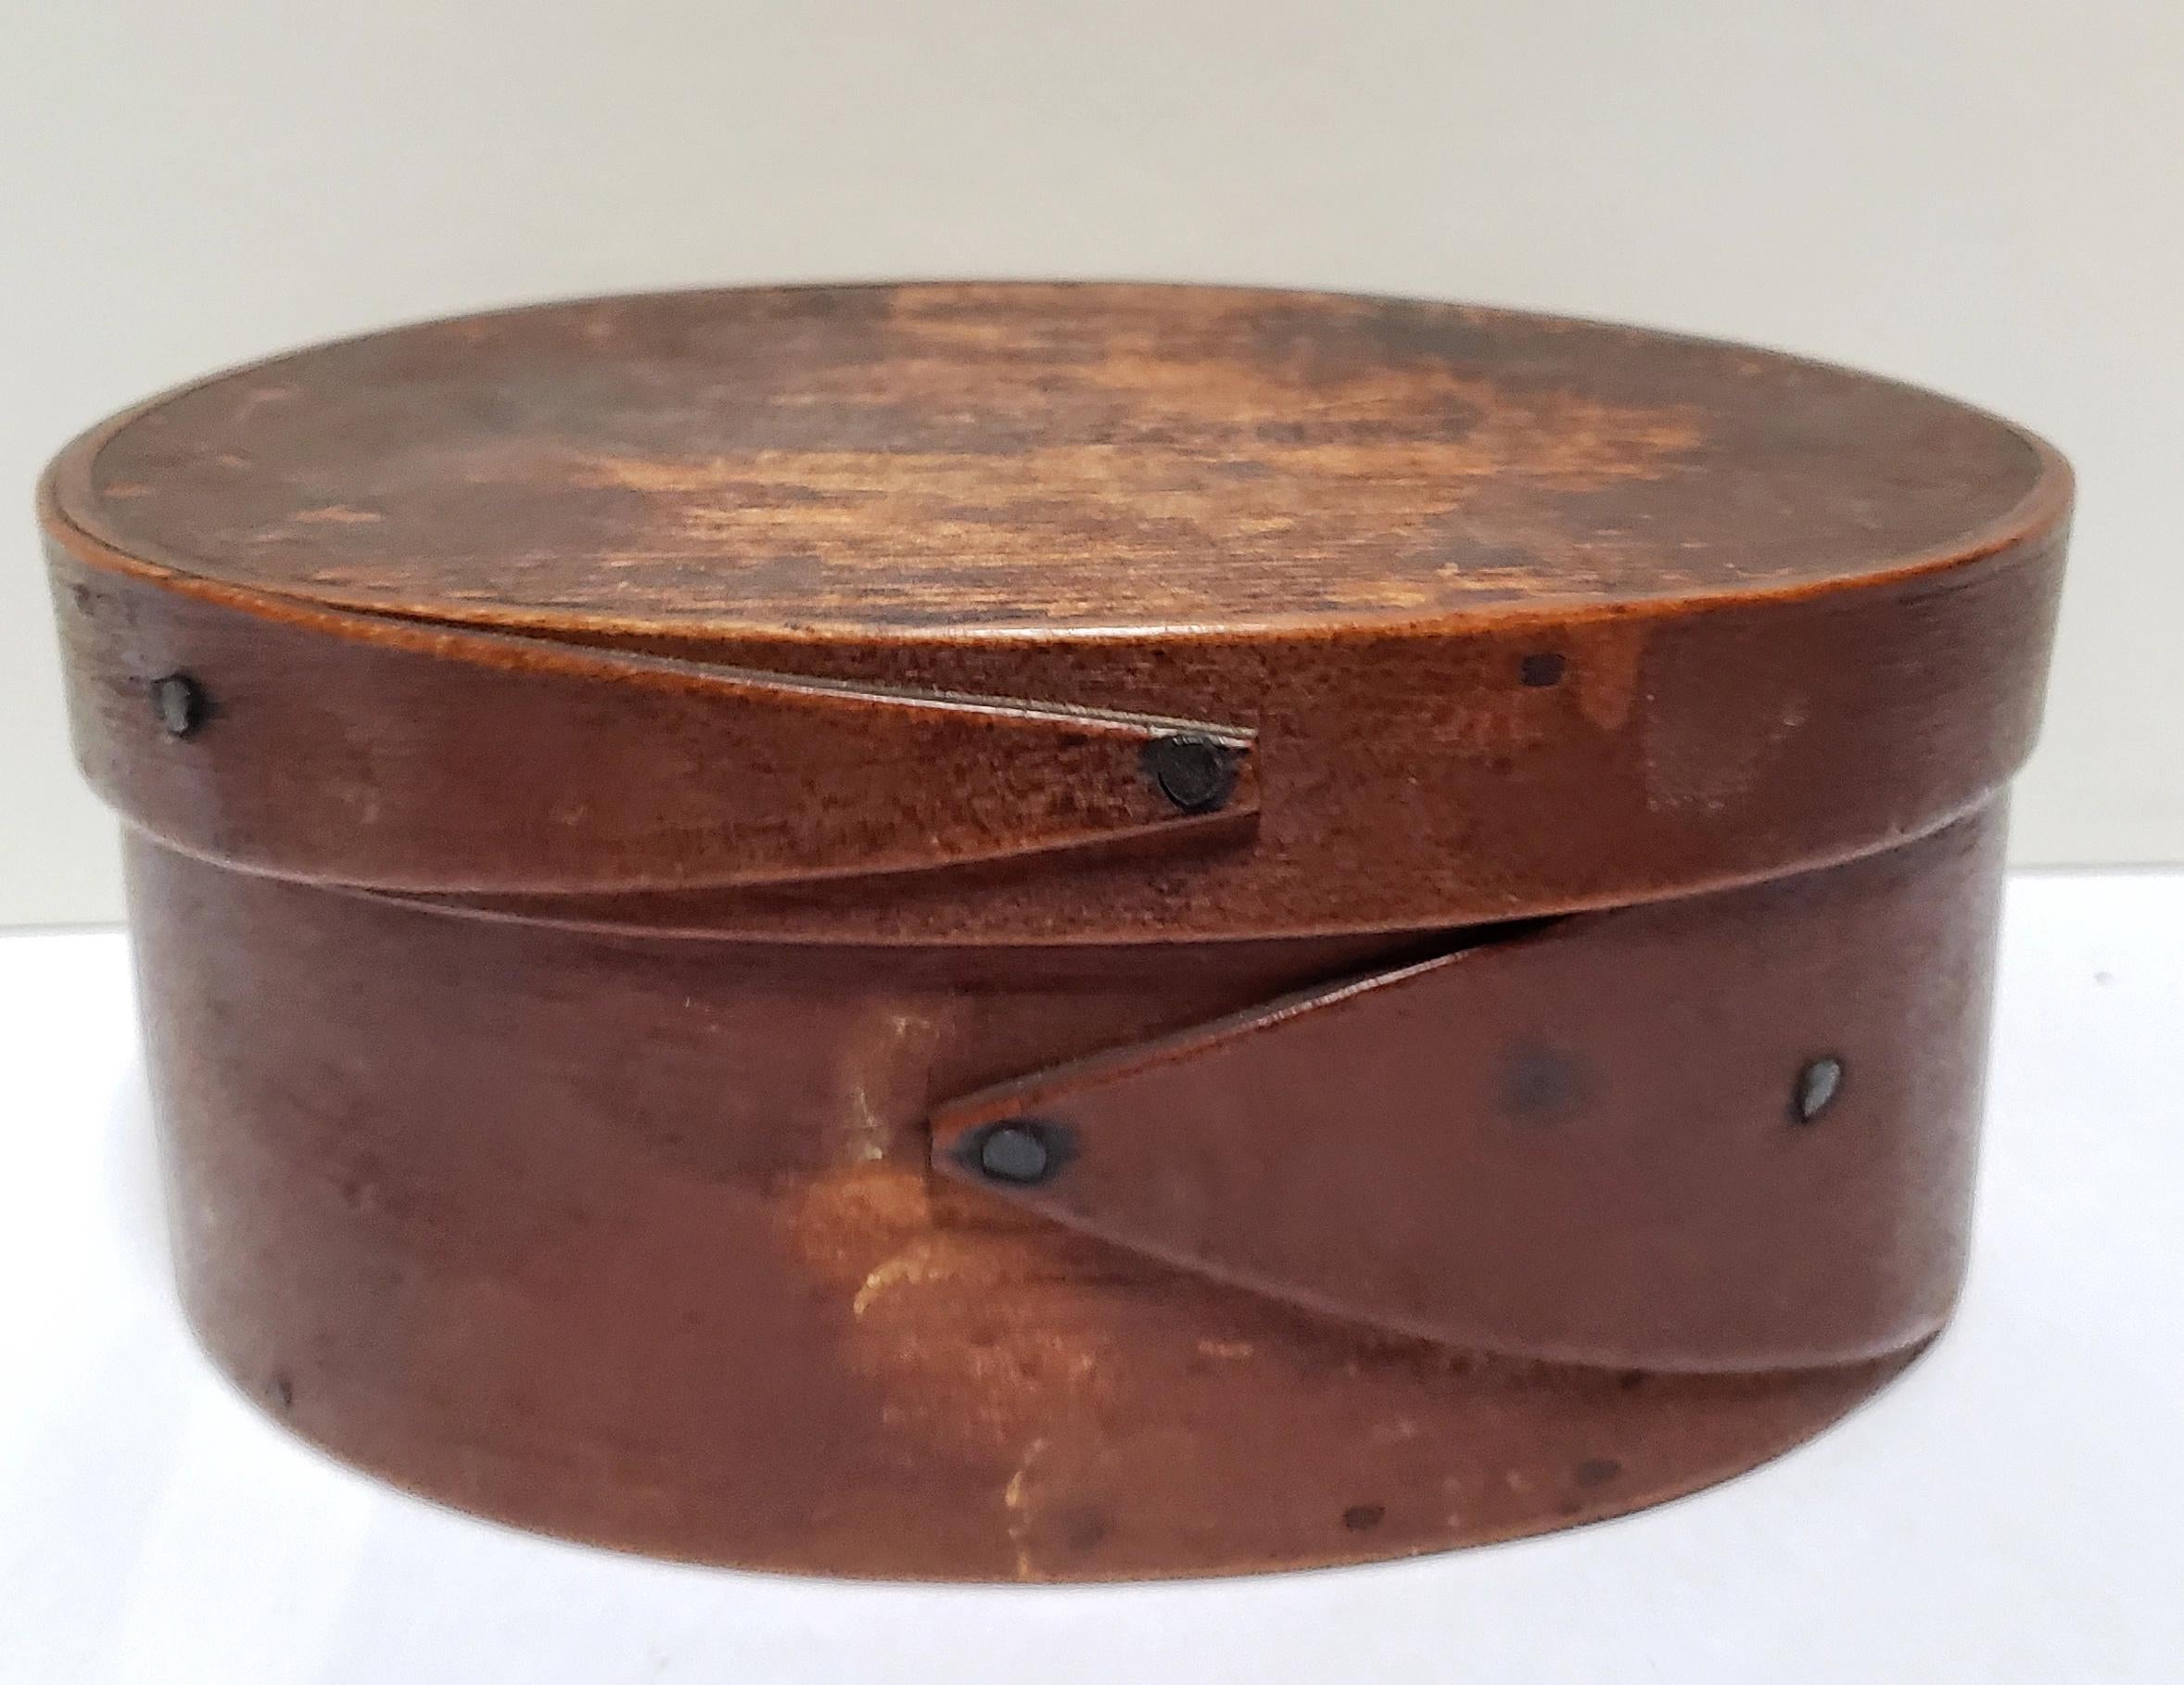 A single lap-jointed bent-wood Shaker oval pantry box with fine old patina. The laps are secured with iron tacks, while the top and bottom boards are wooden pegged. The wood is richly colored by a century and a half of use. The box was made in the